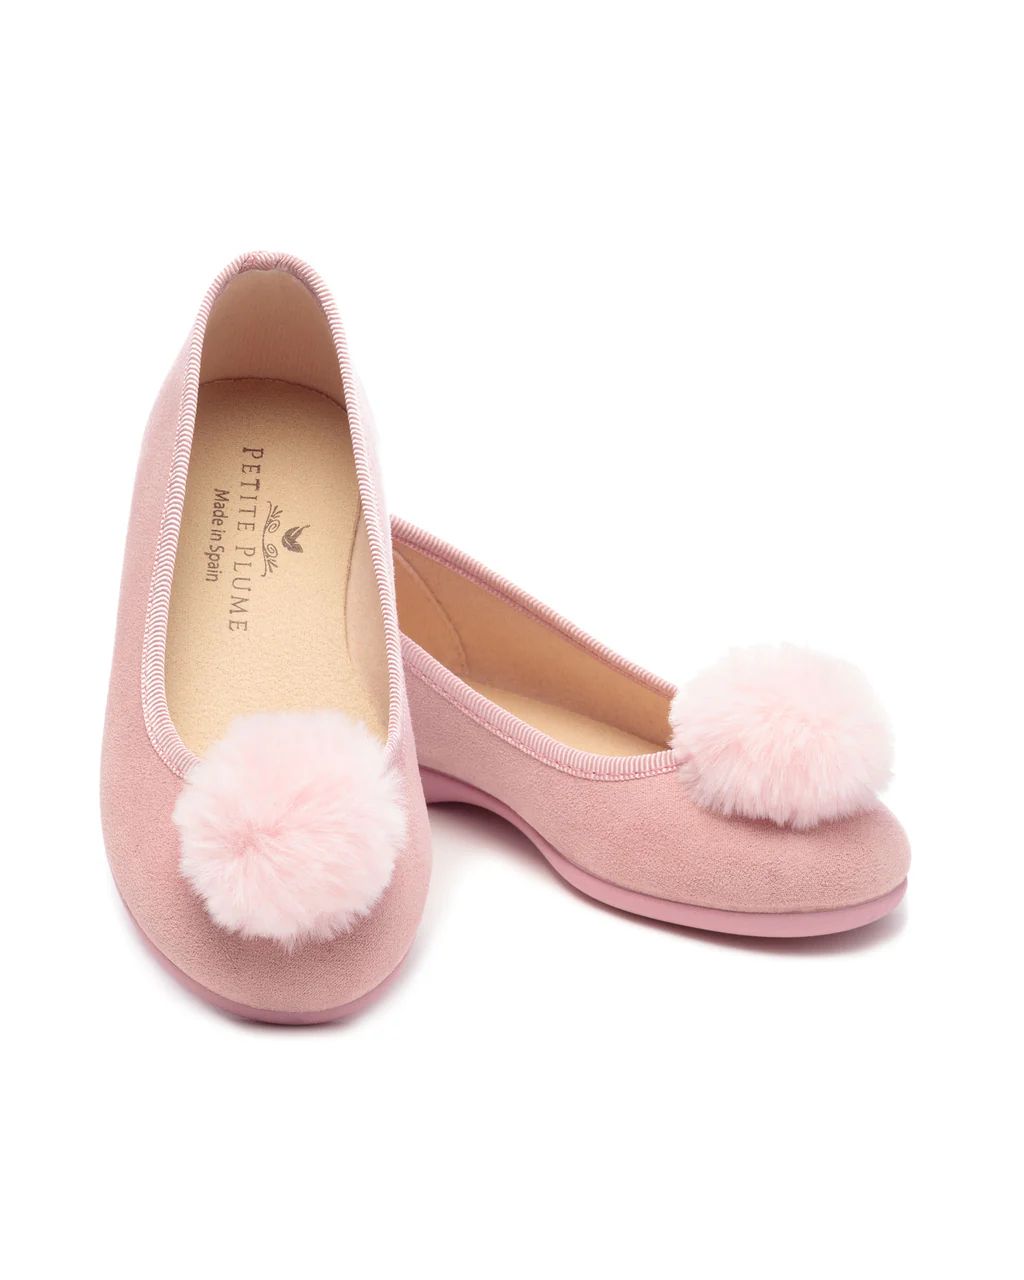 The Juliette Slipper in Antique Rose Suede with Pom | Petite Plume